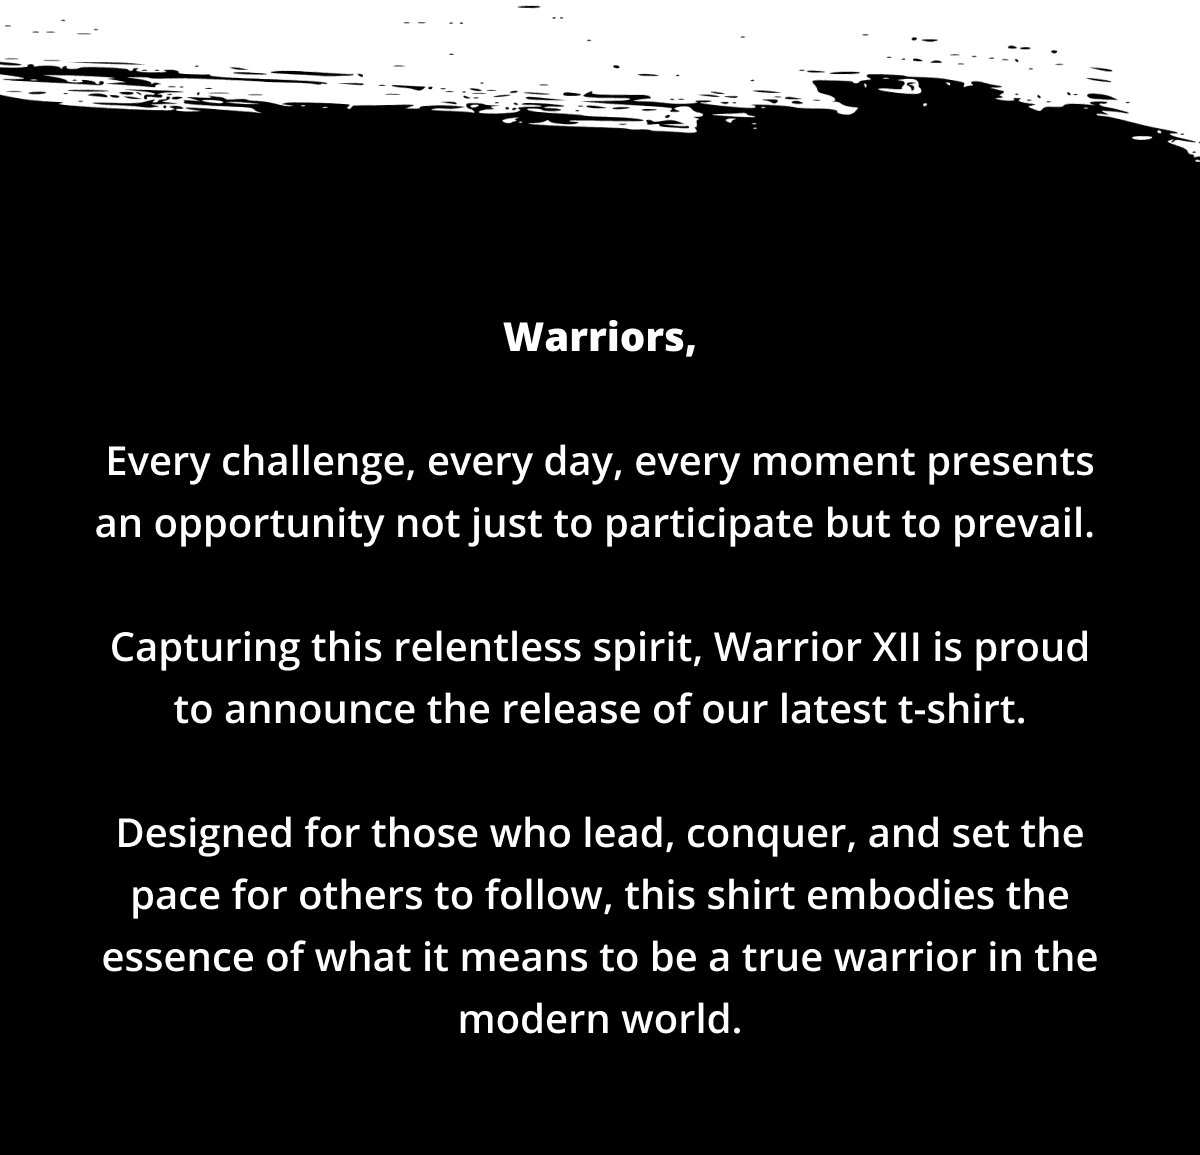 Warriors, Every challenge, every day, every moment presents an opportunity not just to participate but to prevail. Capturing this relentless spirit, Warrior XII is proud to announce the release of our latest t-shirt. Designed for those who lead, conquer, and set the pace for others to follow, this shirt embodies the essence of what it means to be a true warrior in the modern world.